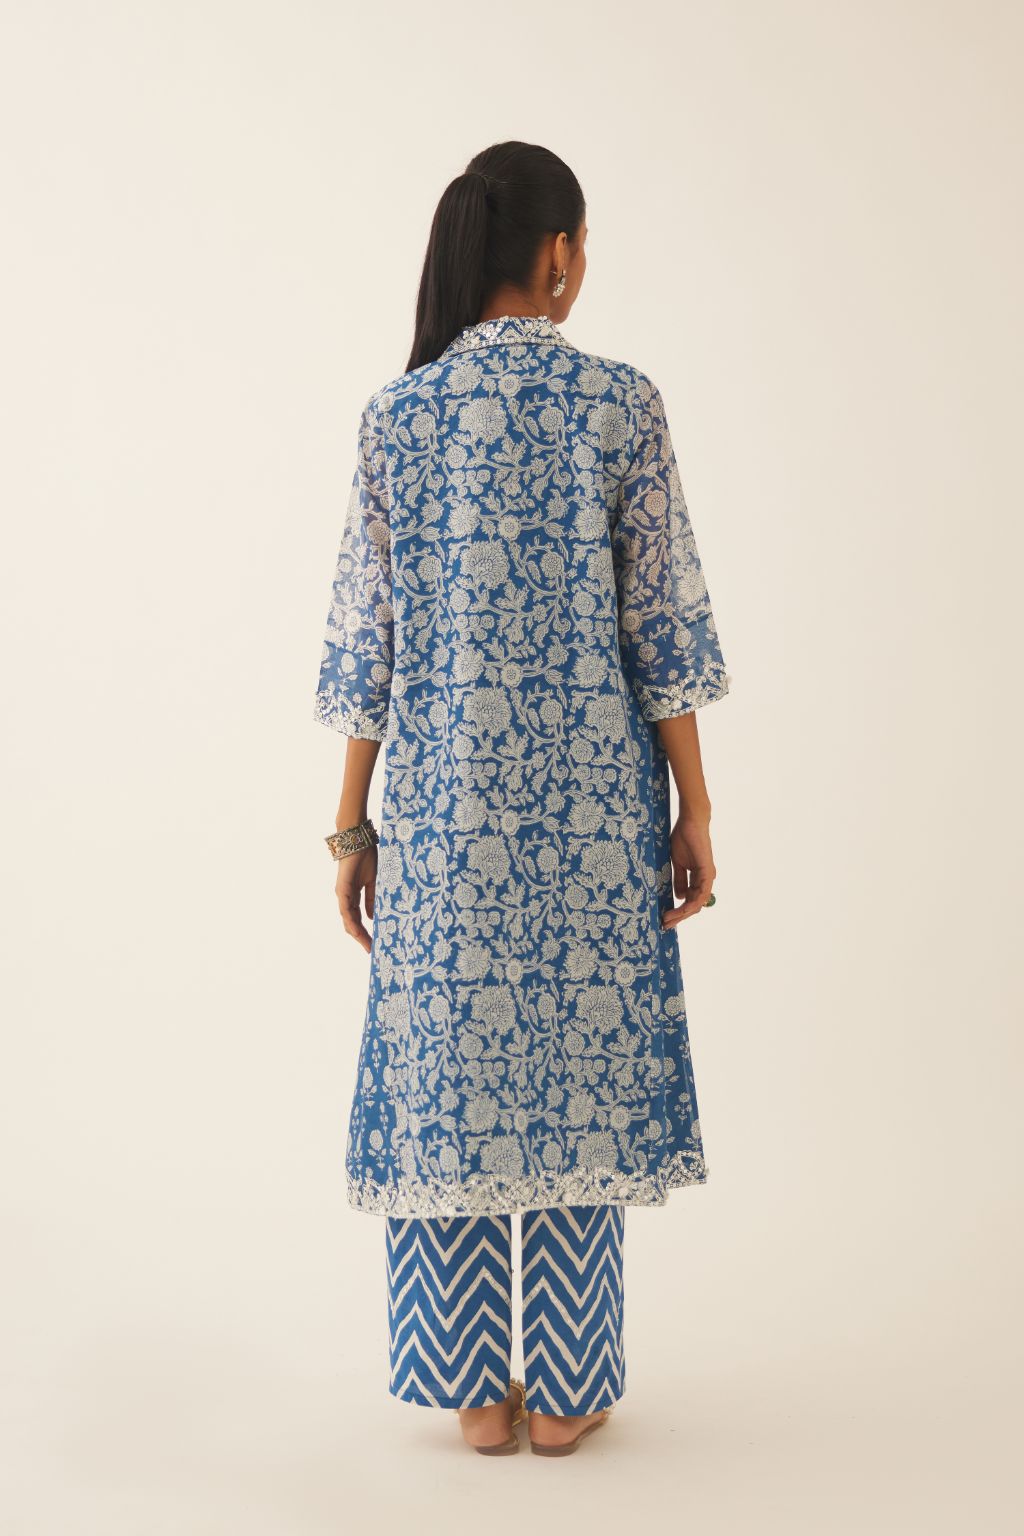 Blue hand block printed A-line short kurta with sequins, tassels and bead work, paired with blue & off white cotton hand block printed straight pants detailed with sequin and bead work at hem.